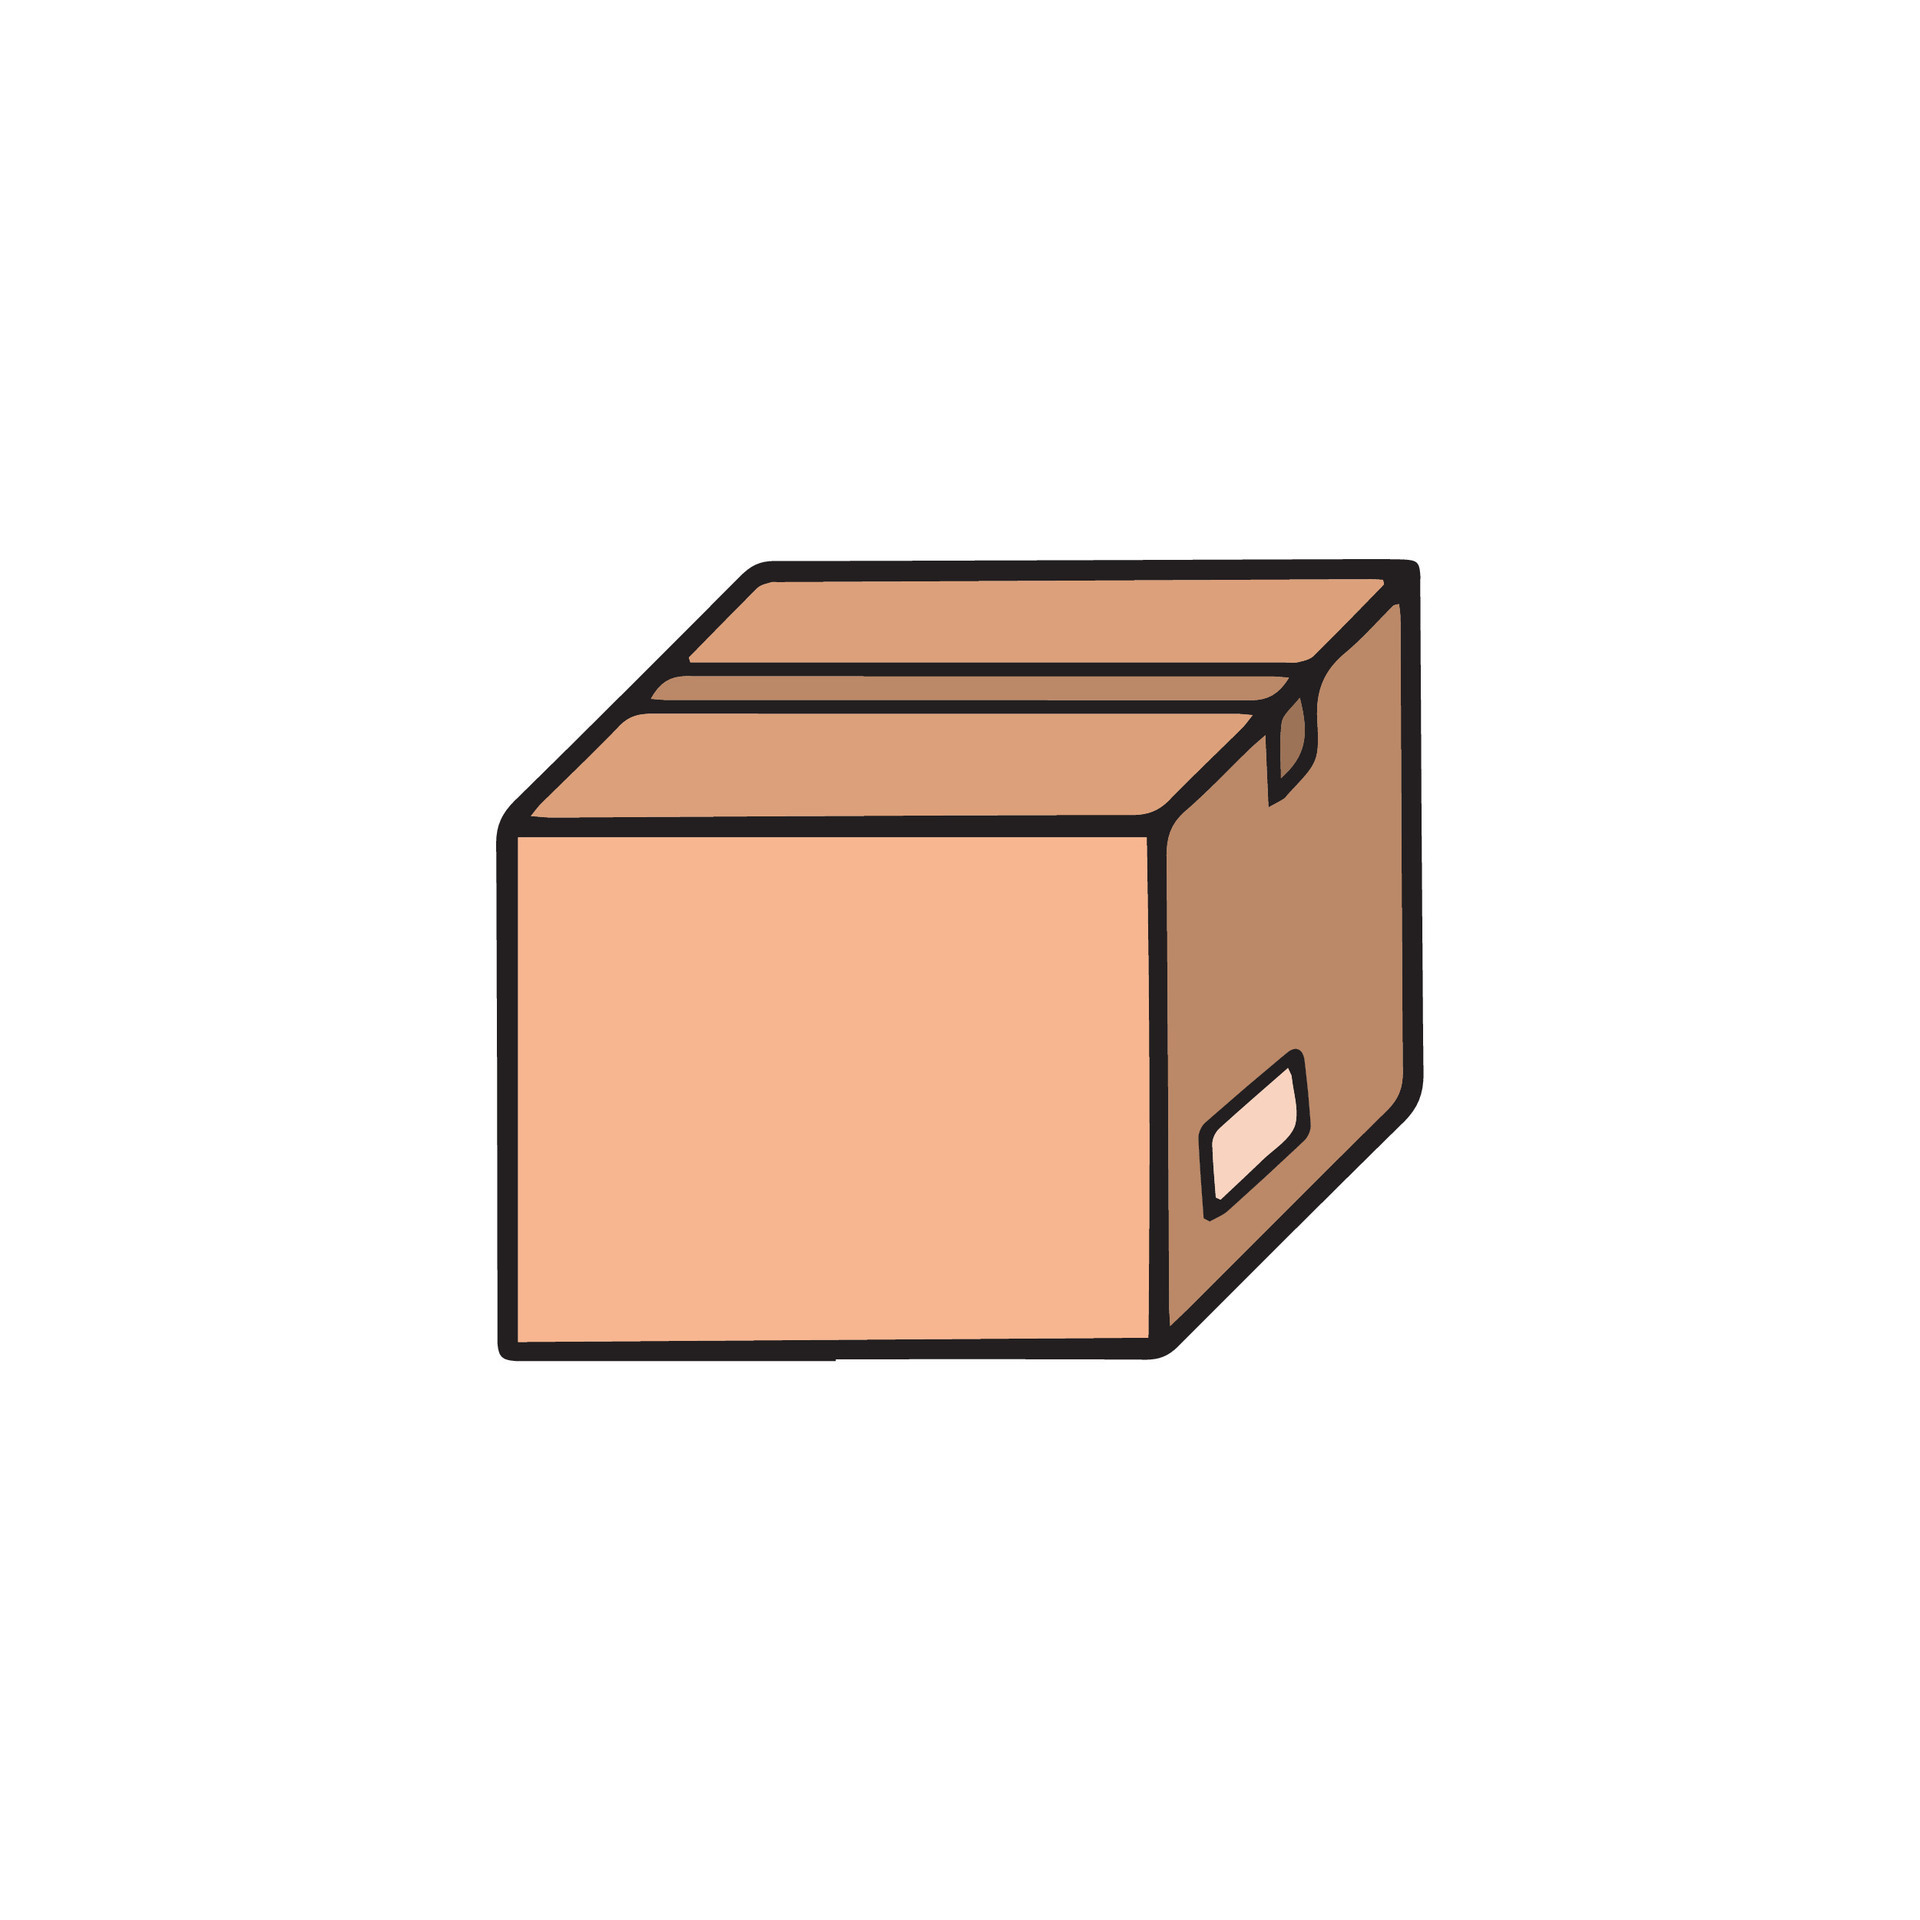 How To Draw a Box Step By Step – For Kids & Beginners-saigonsouth.com.vn